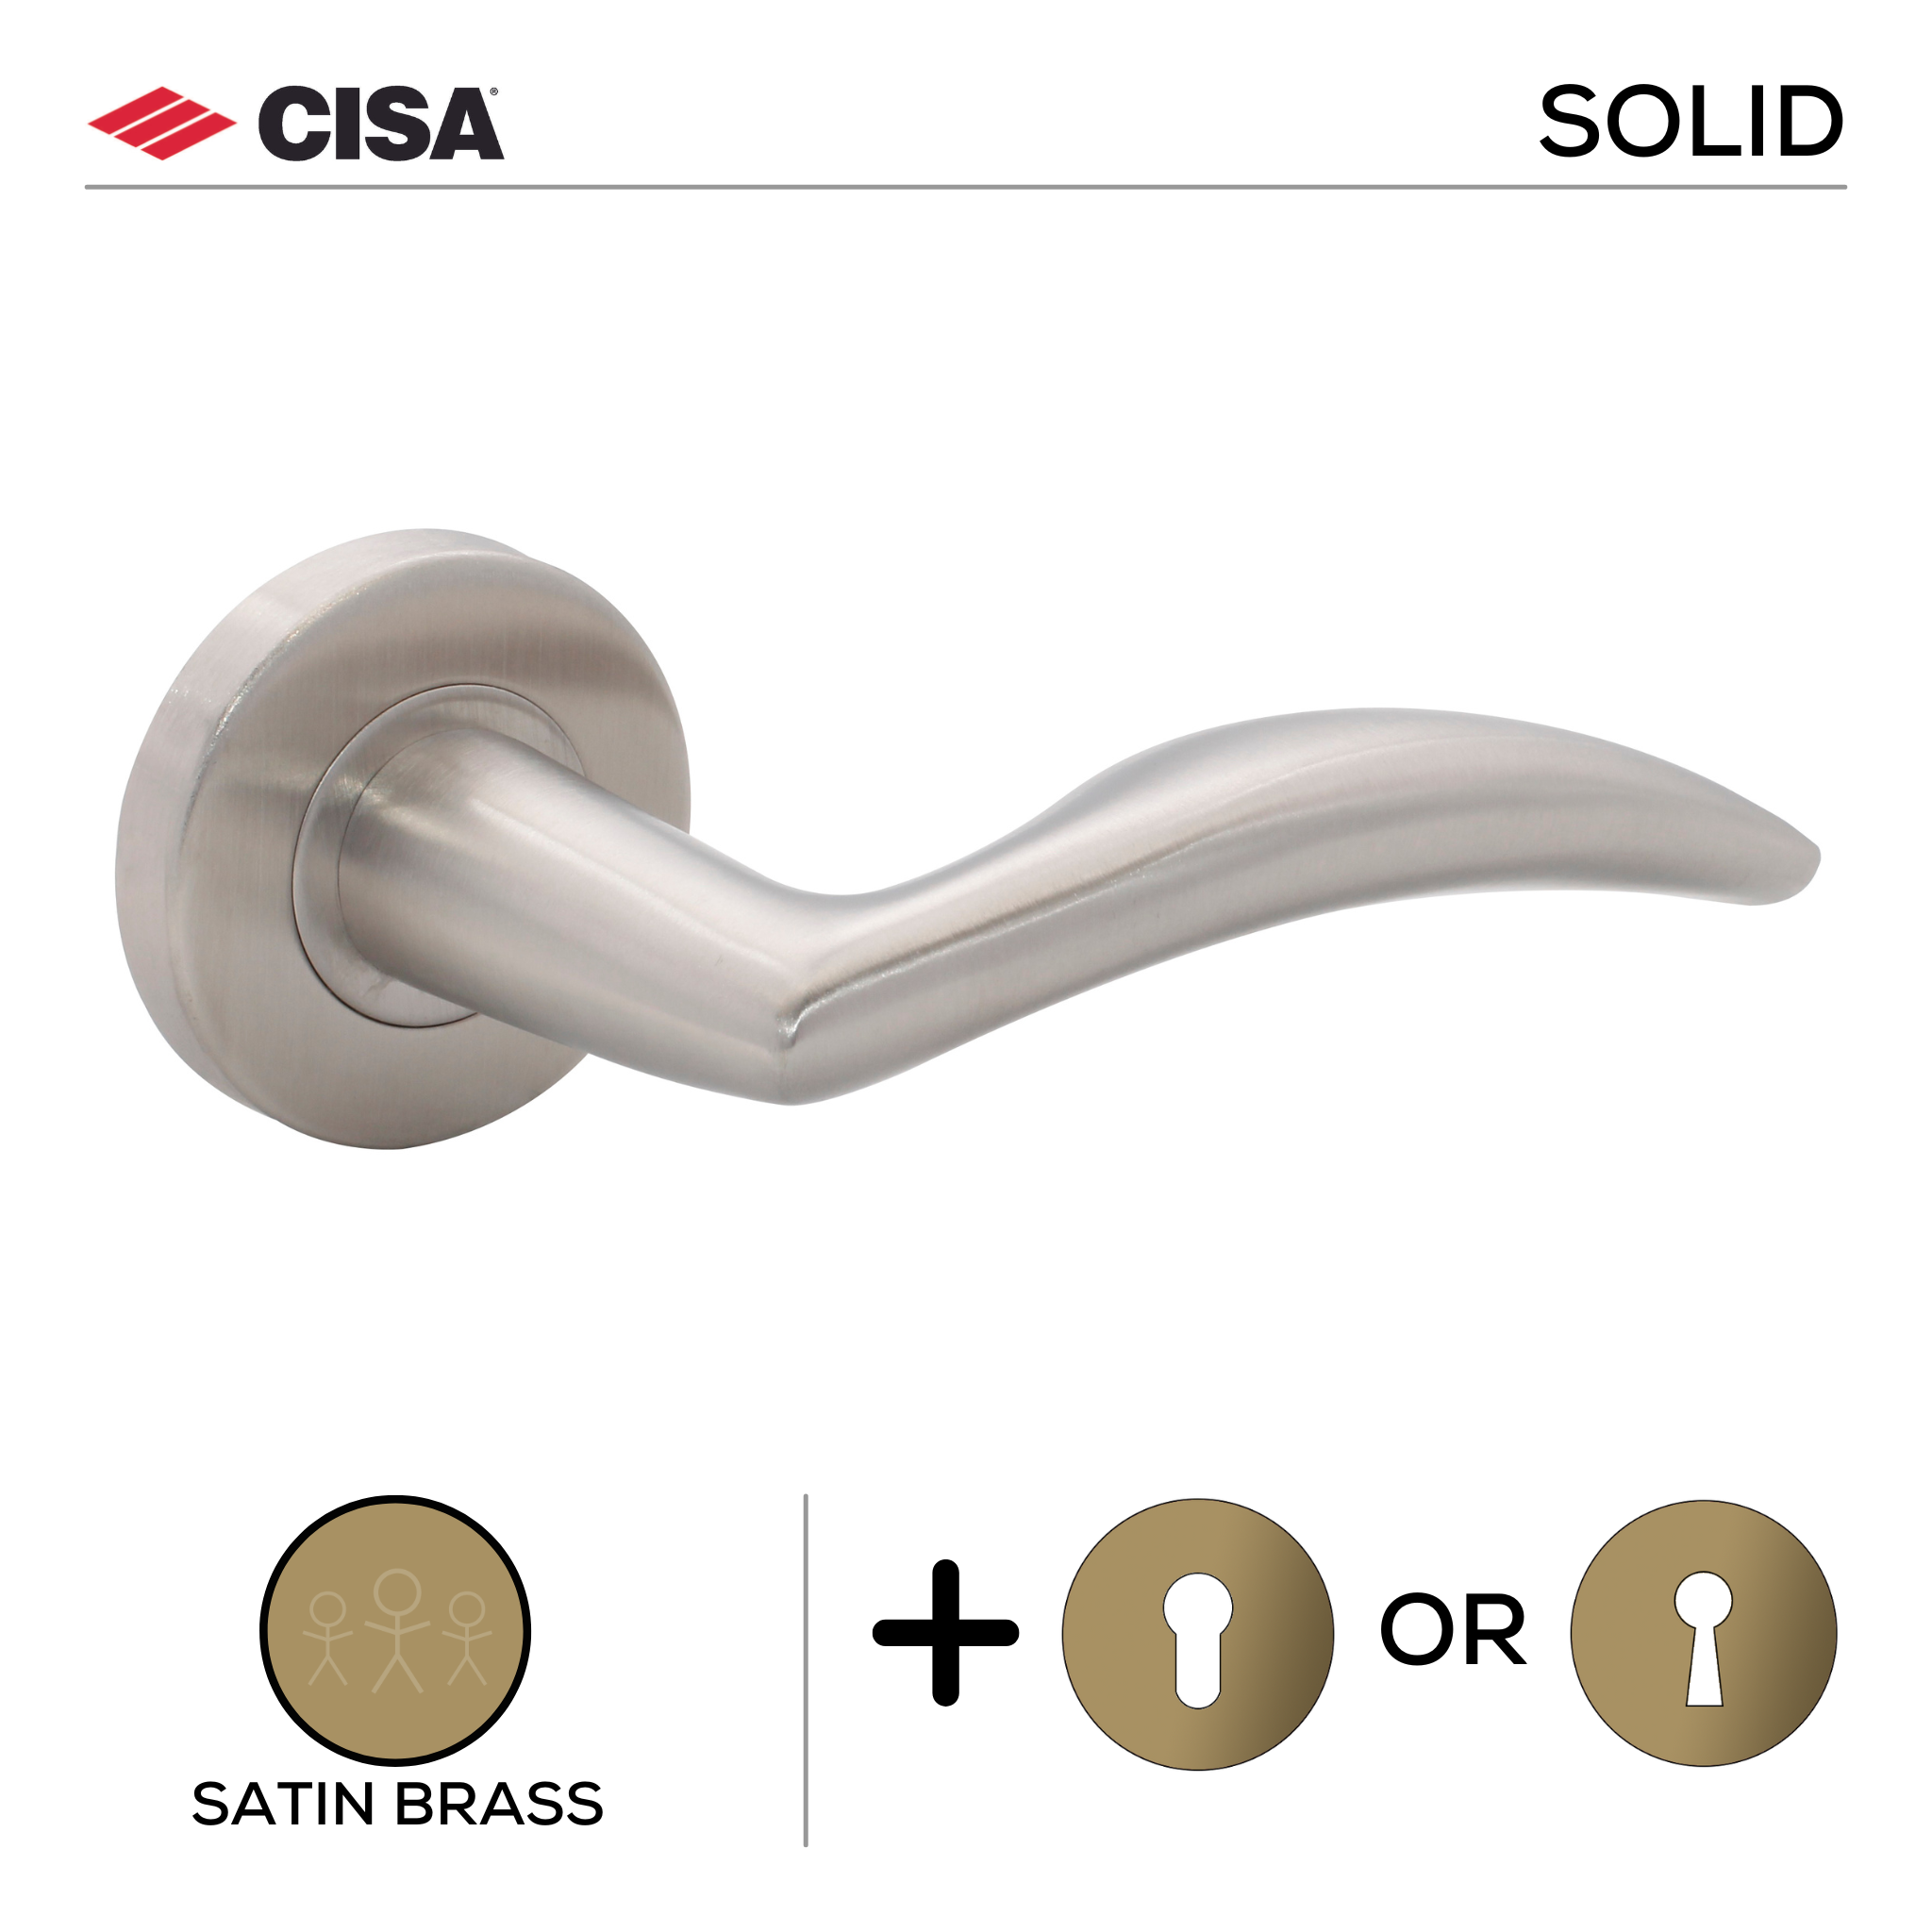 FS114.R._.SB, Lever Handles, Solid, On Round Rose, With Escutcheons, Satin Brass, CISA